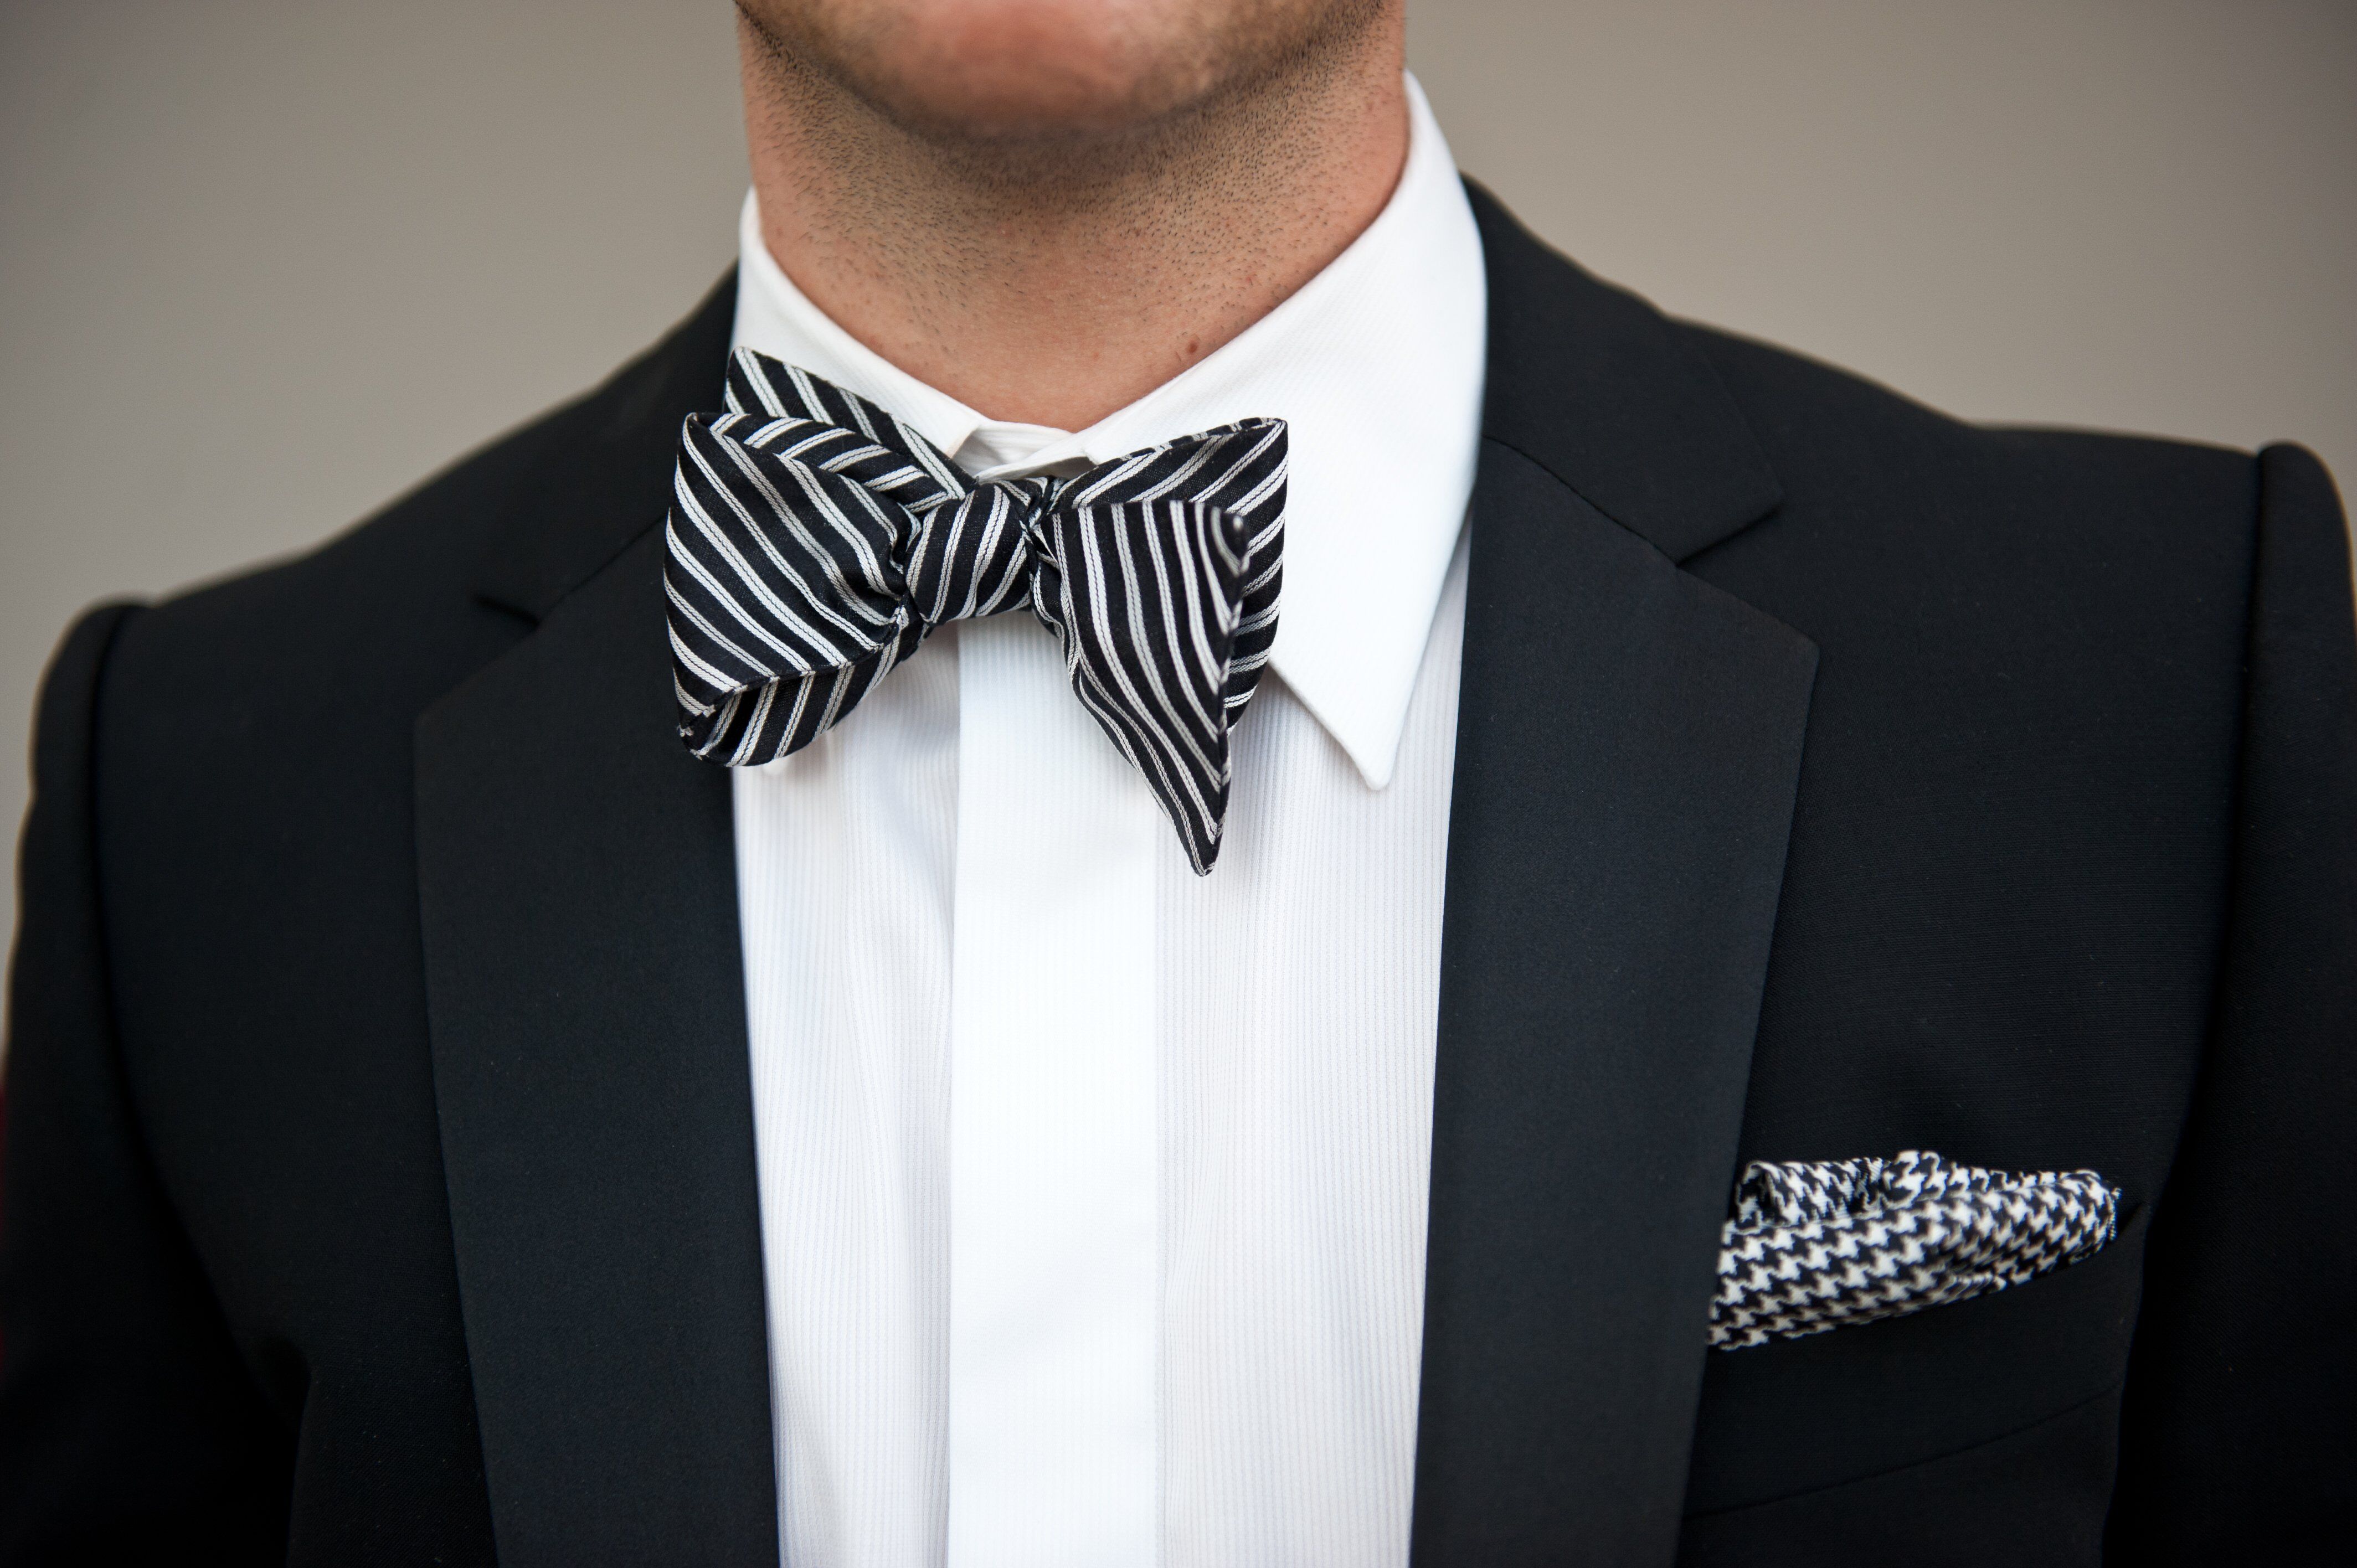 Black and White Striped Bow Tie